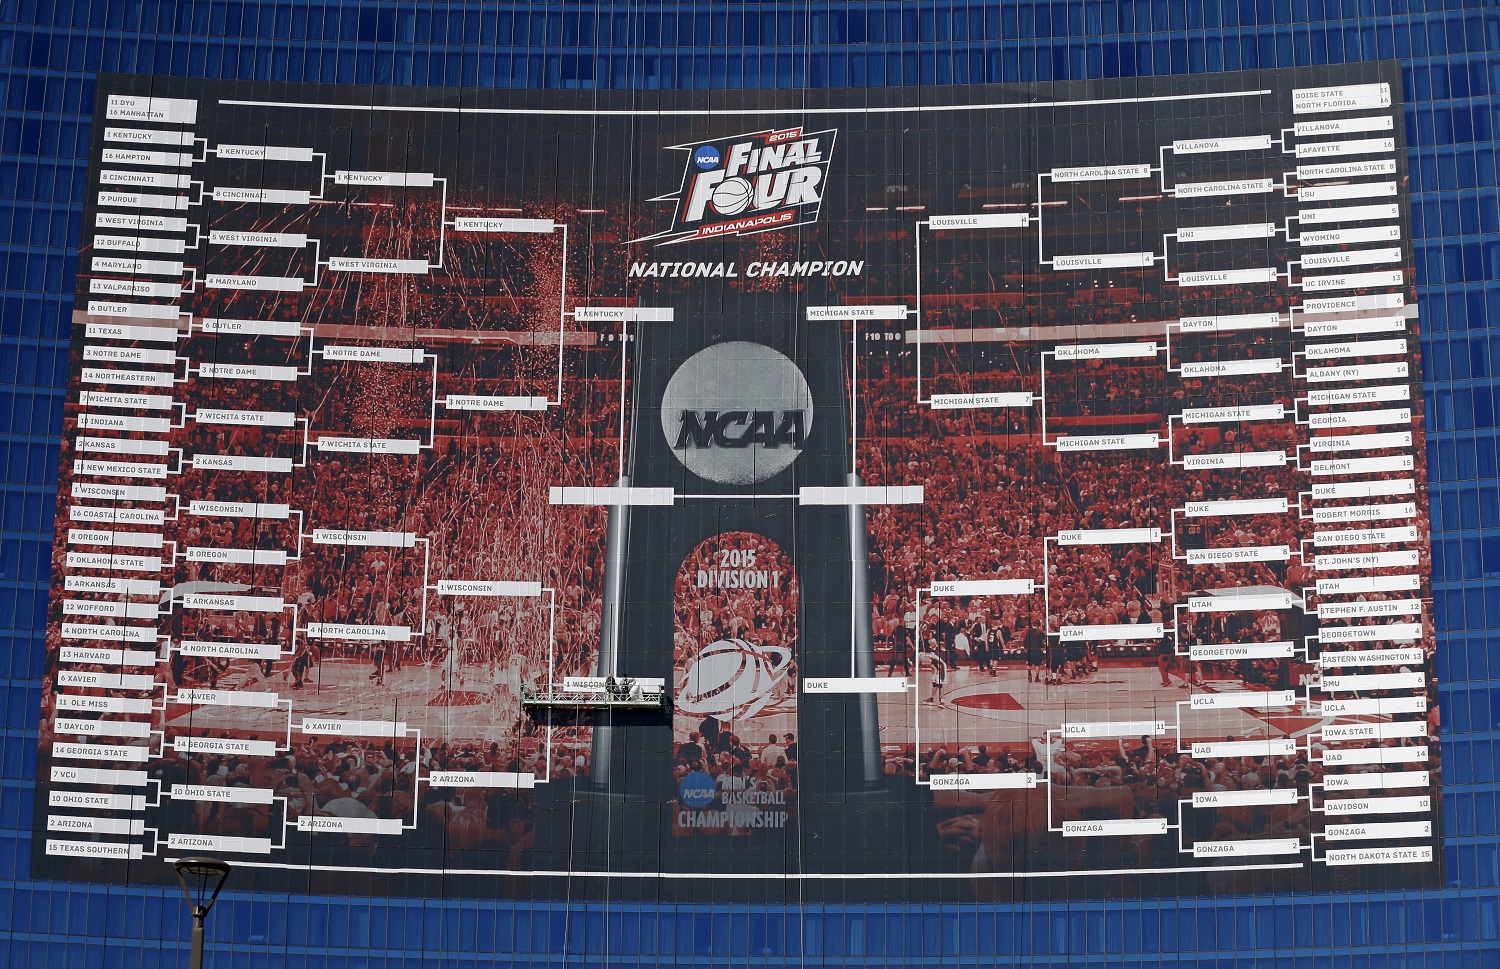 Workers complete the Final Four match ups on a 2015 NCAA Division I Mens Basketball Championship bracket that is displayed on the side of the JW Marriott, in Indianapolis, Monday, March 30, 2015. (AP Photo/Michael Conroy)